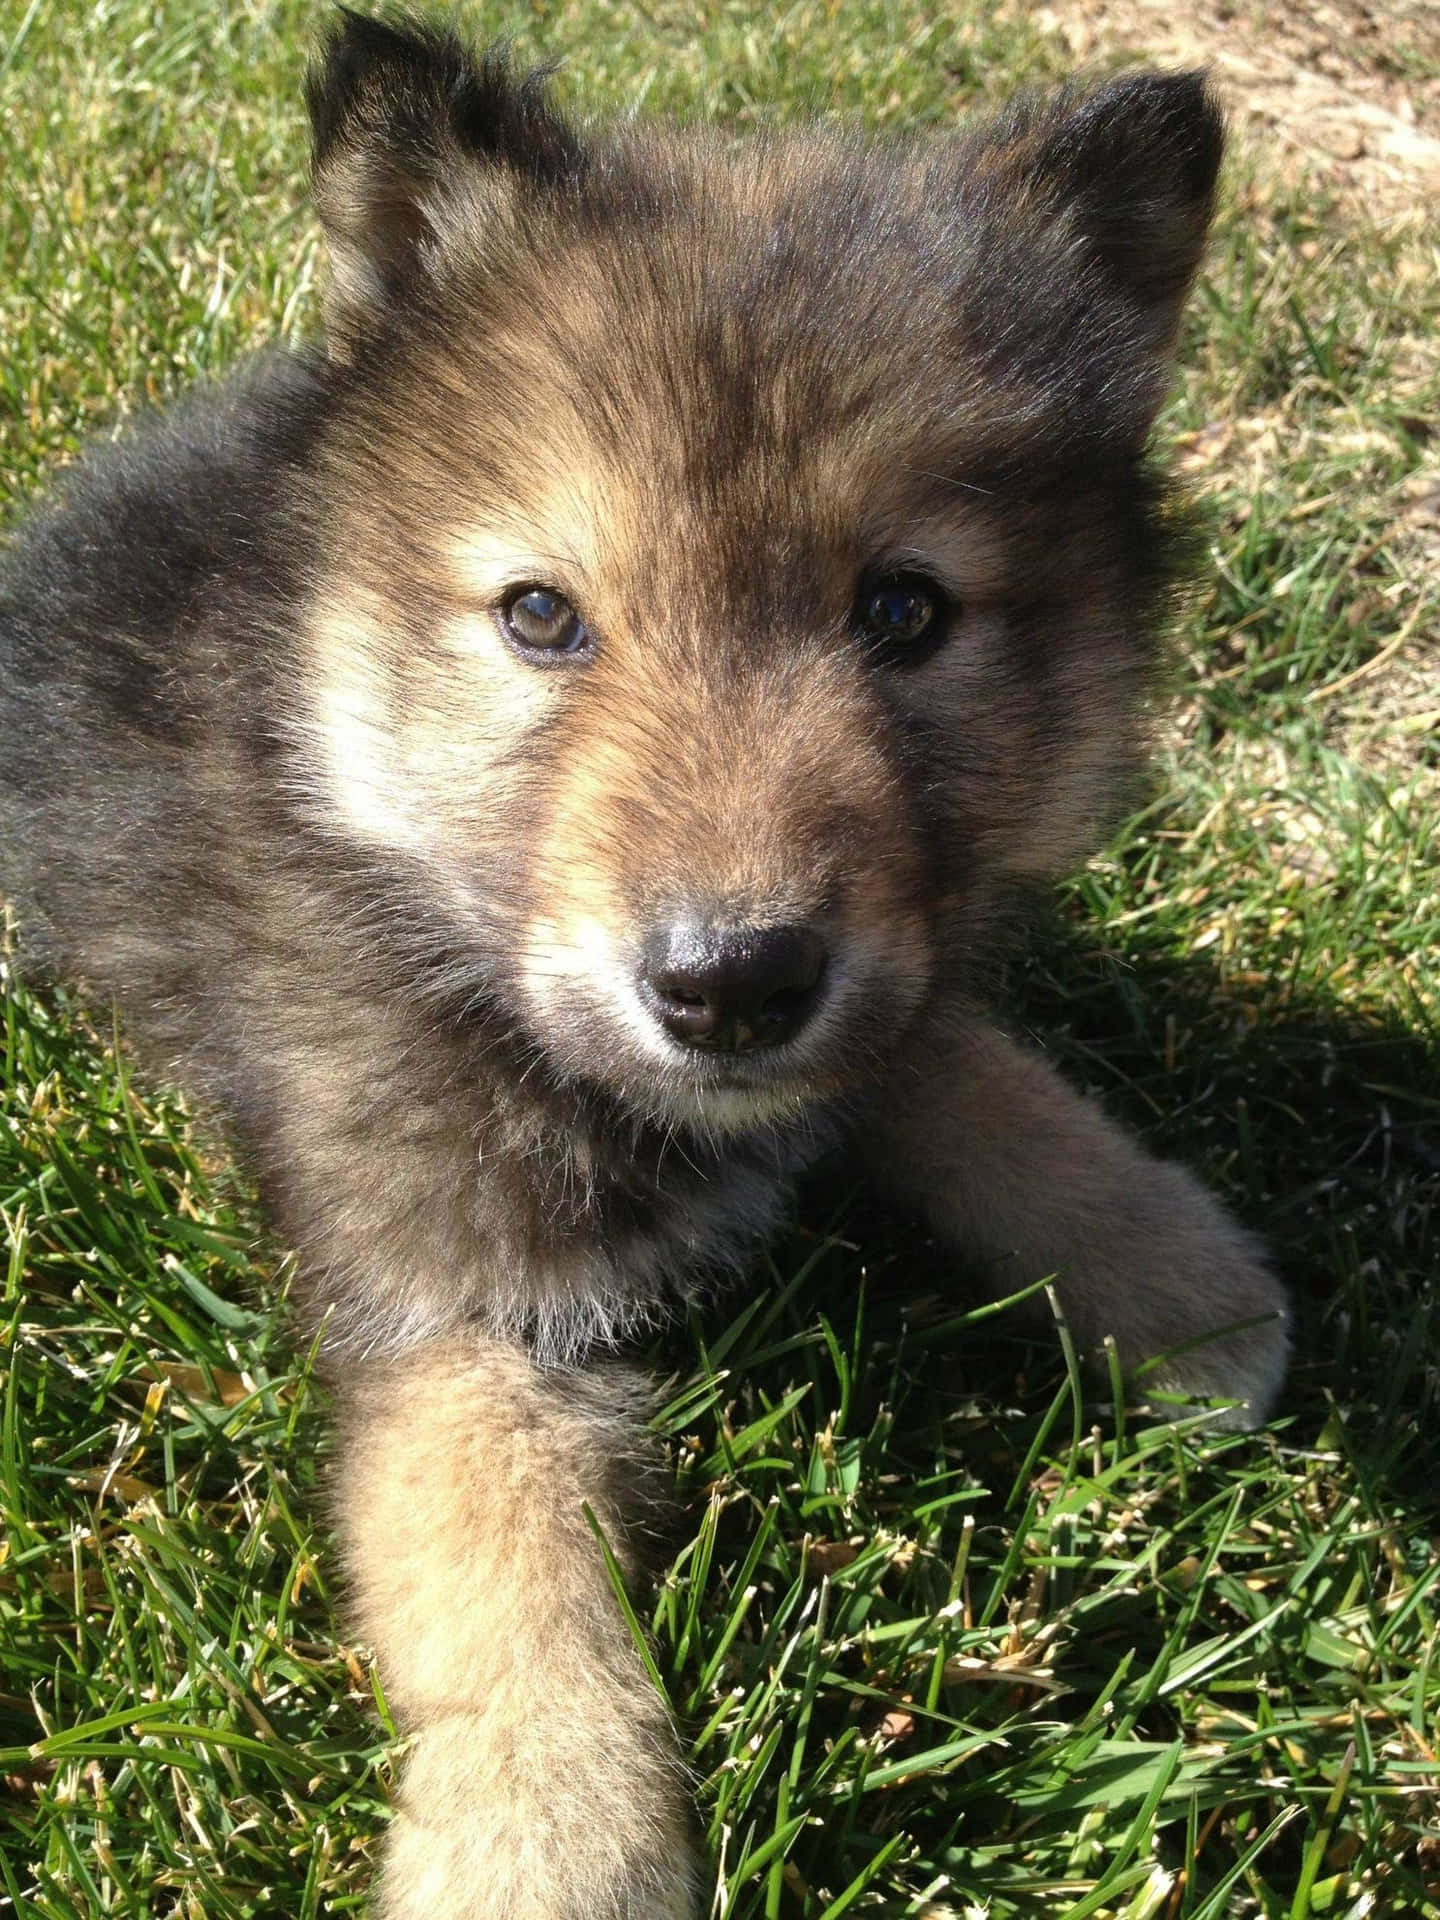 "An adorable wolf pup looking innocently into the distance."